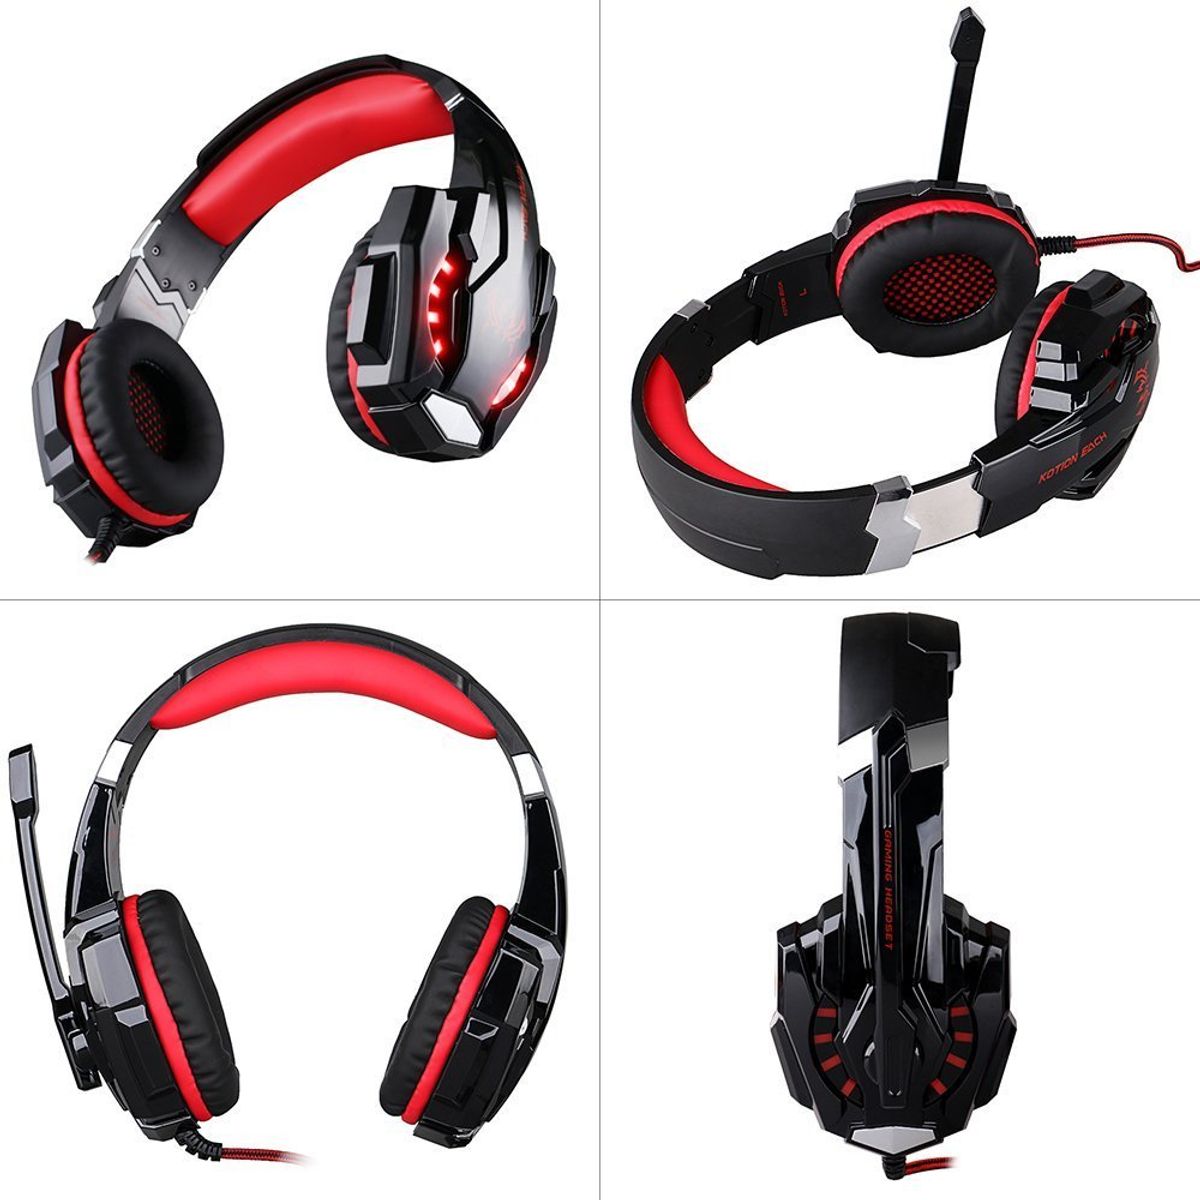 kotion each g9000 gaming headset black & red review